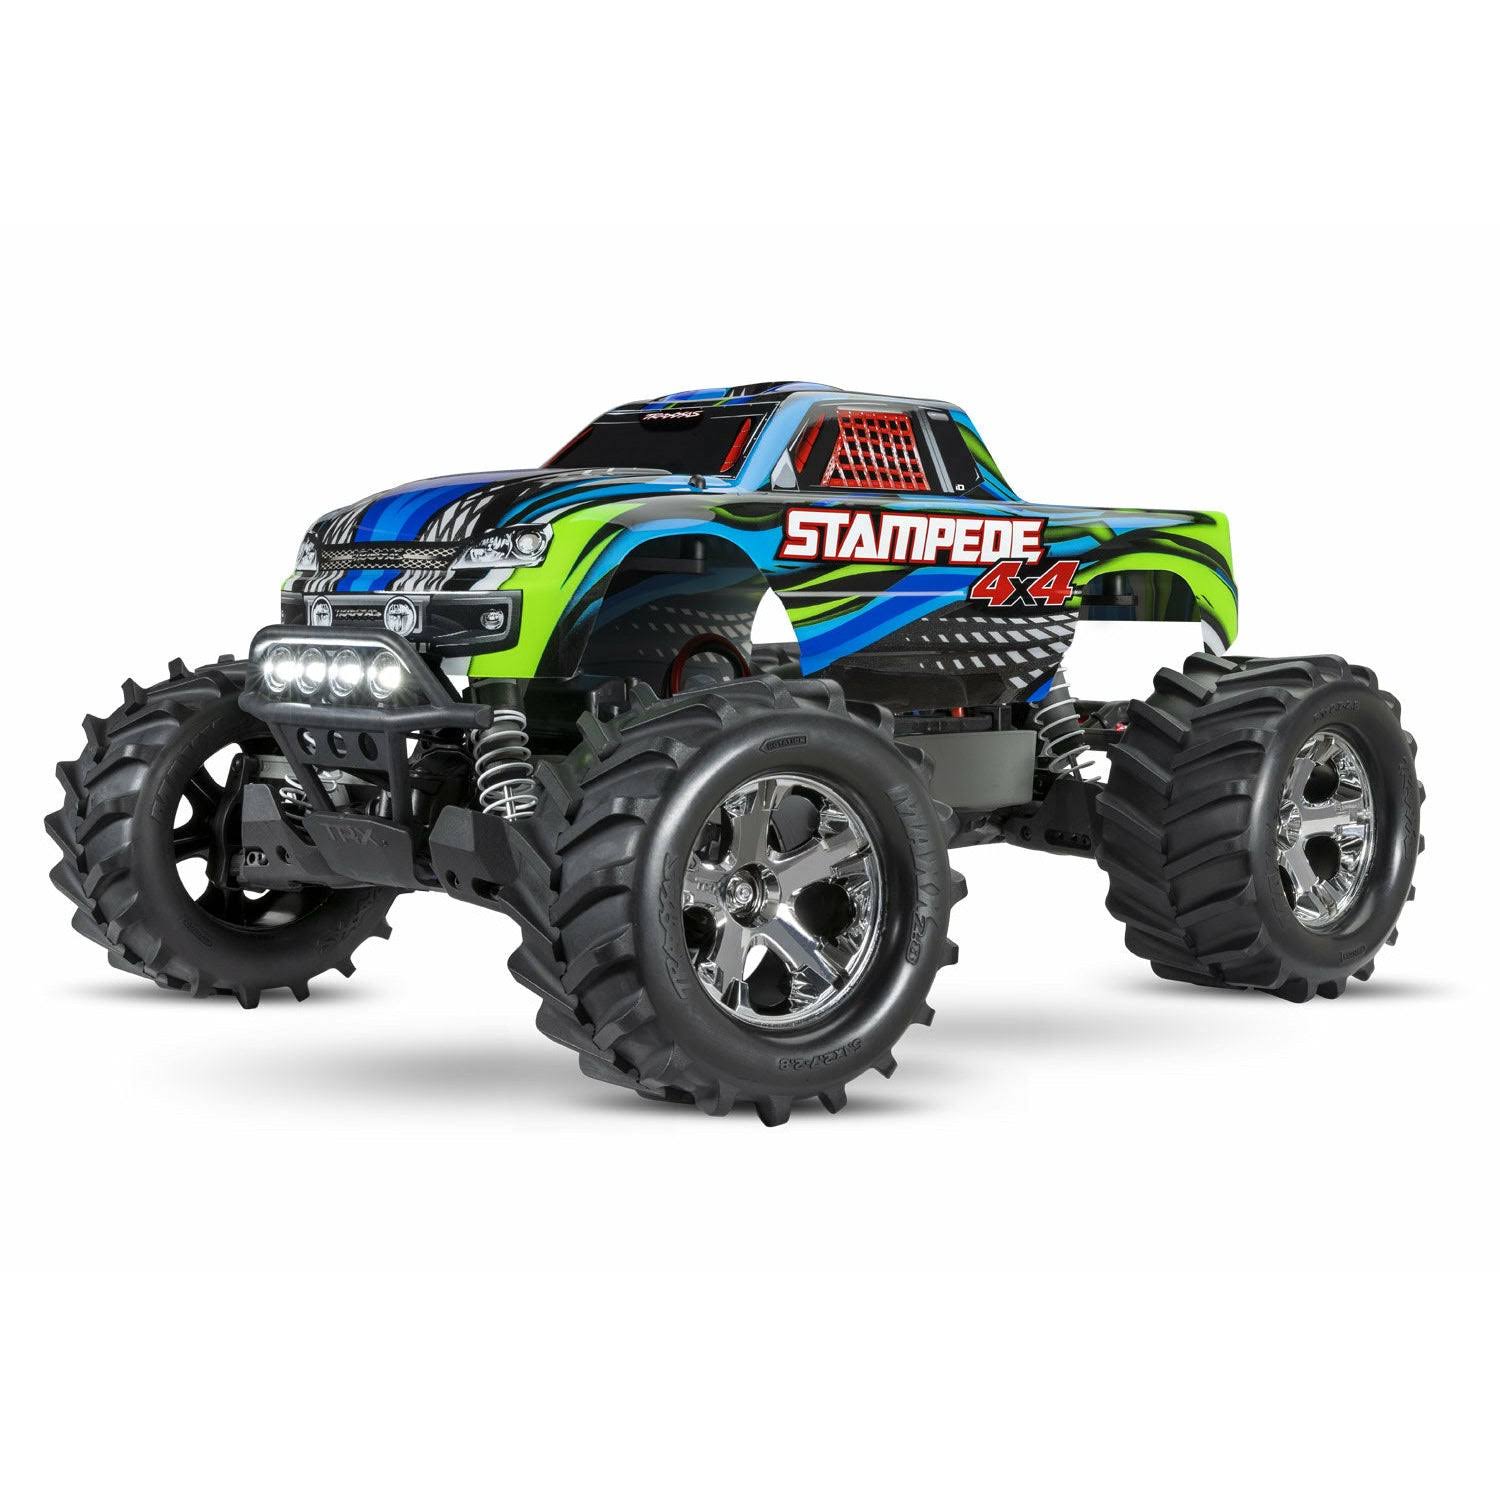 Traxxas 1/10 Stampede 4x4 With LED Lights Blue